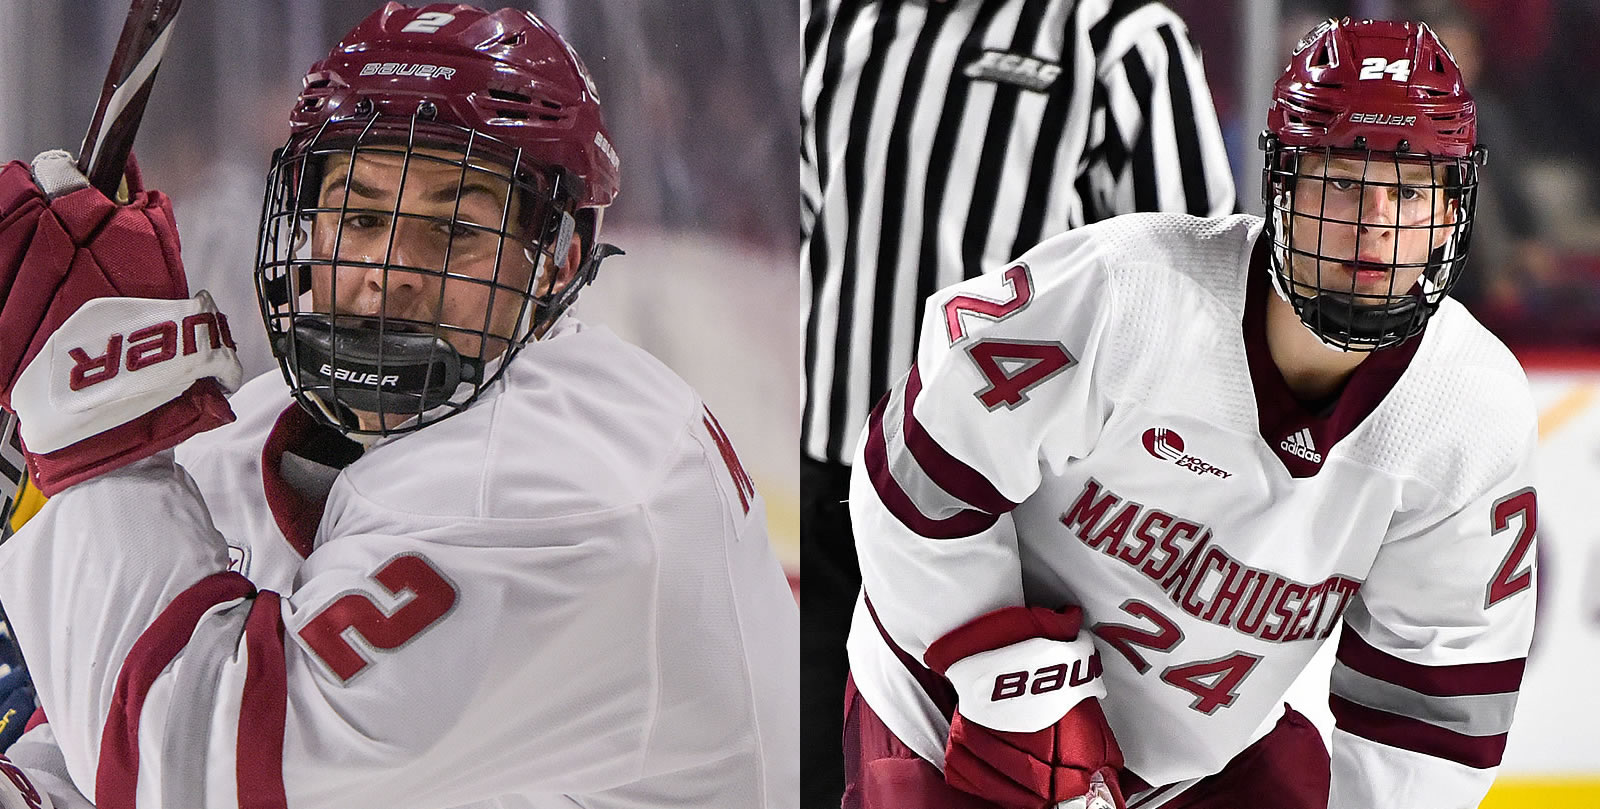 Cale Makar credits UMass development for helping to launch his